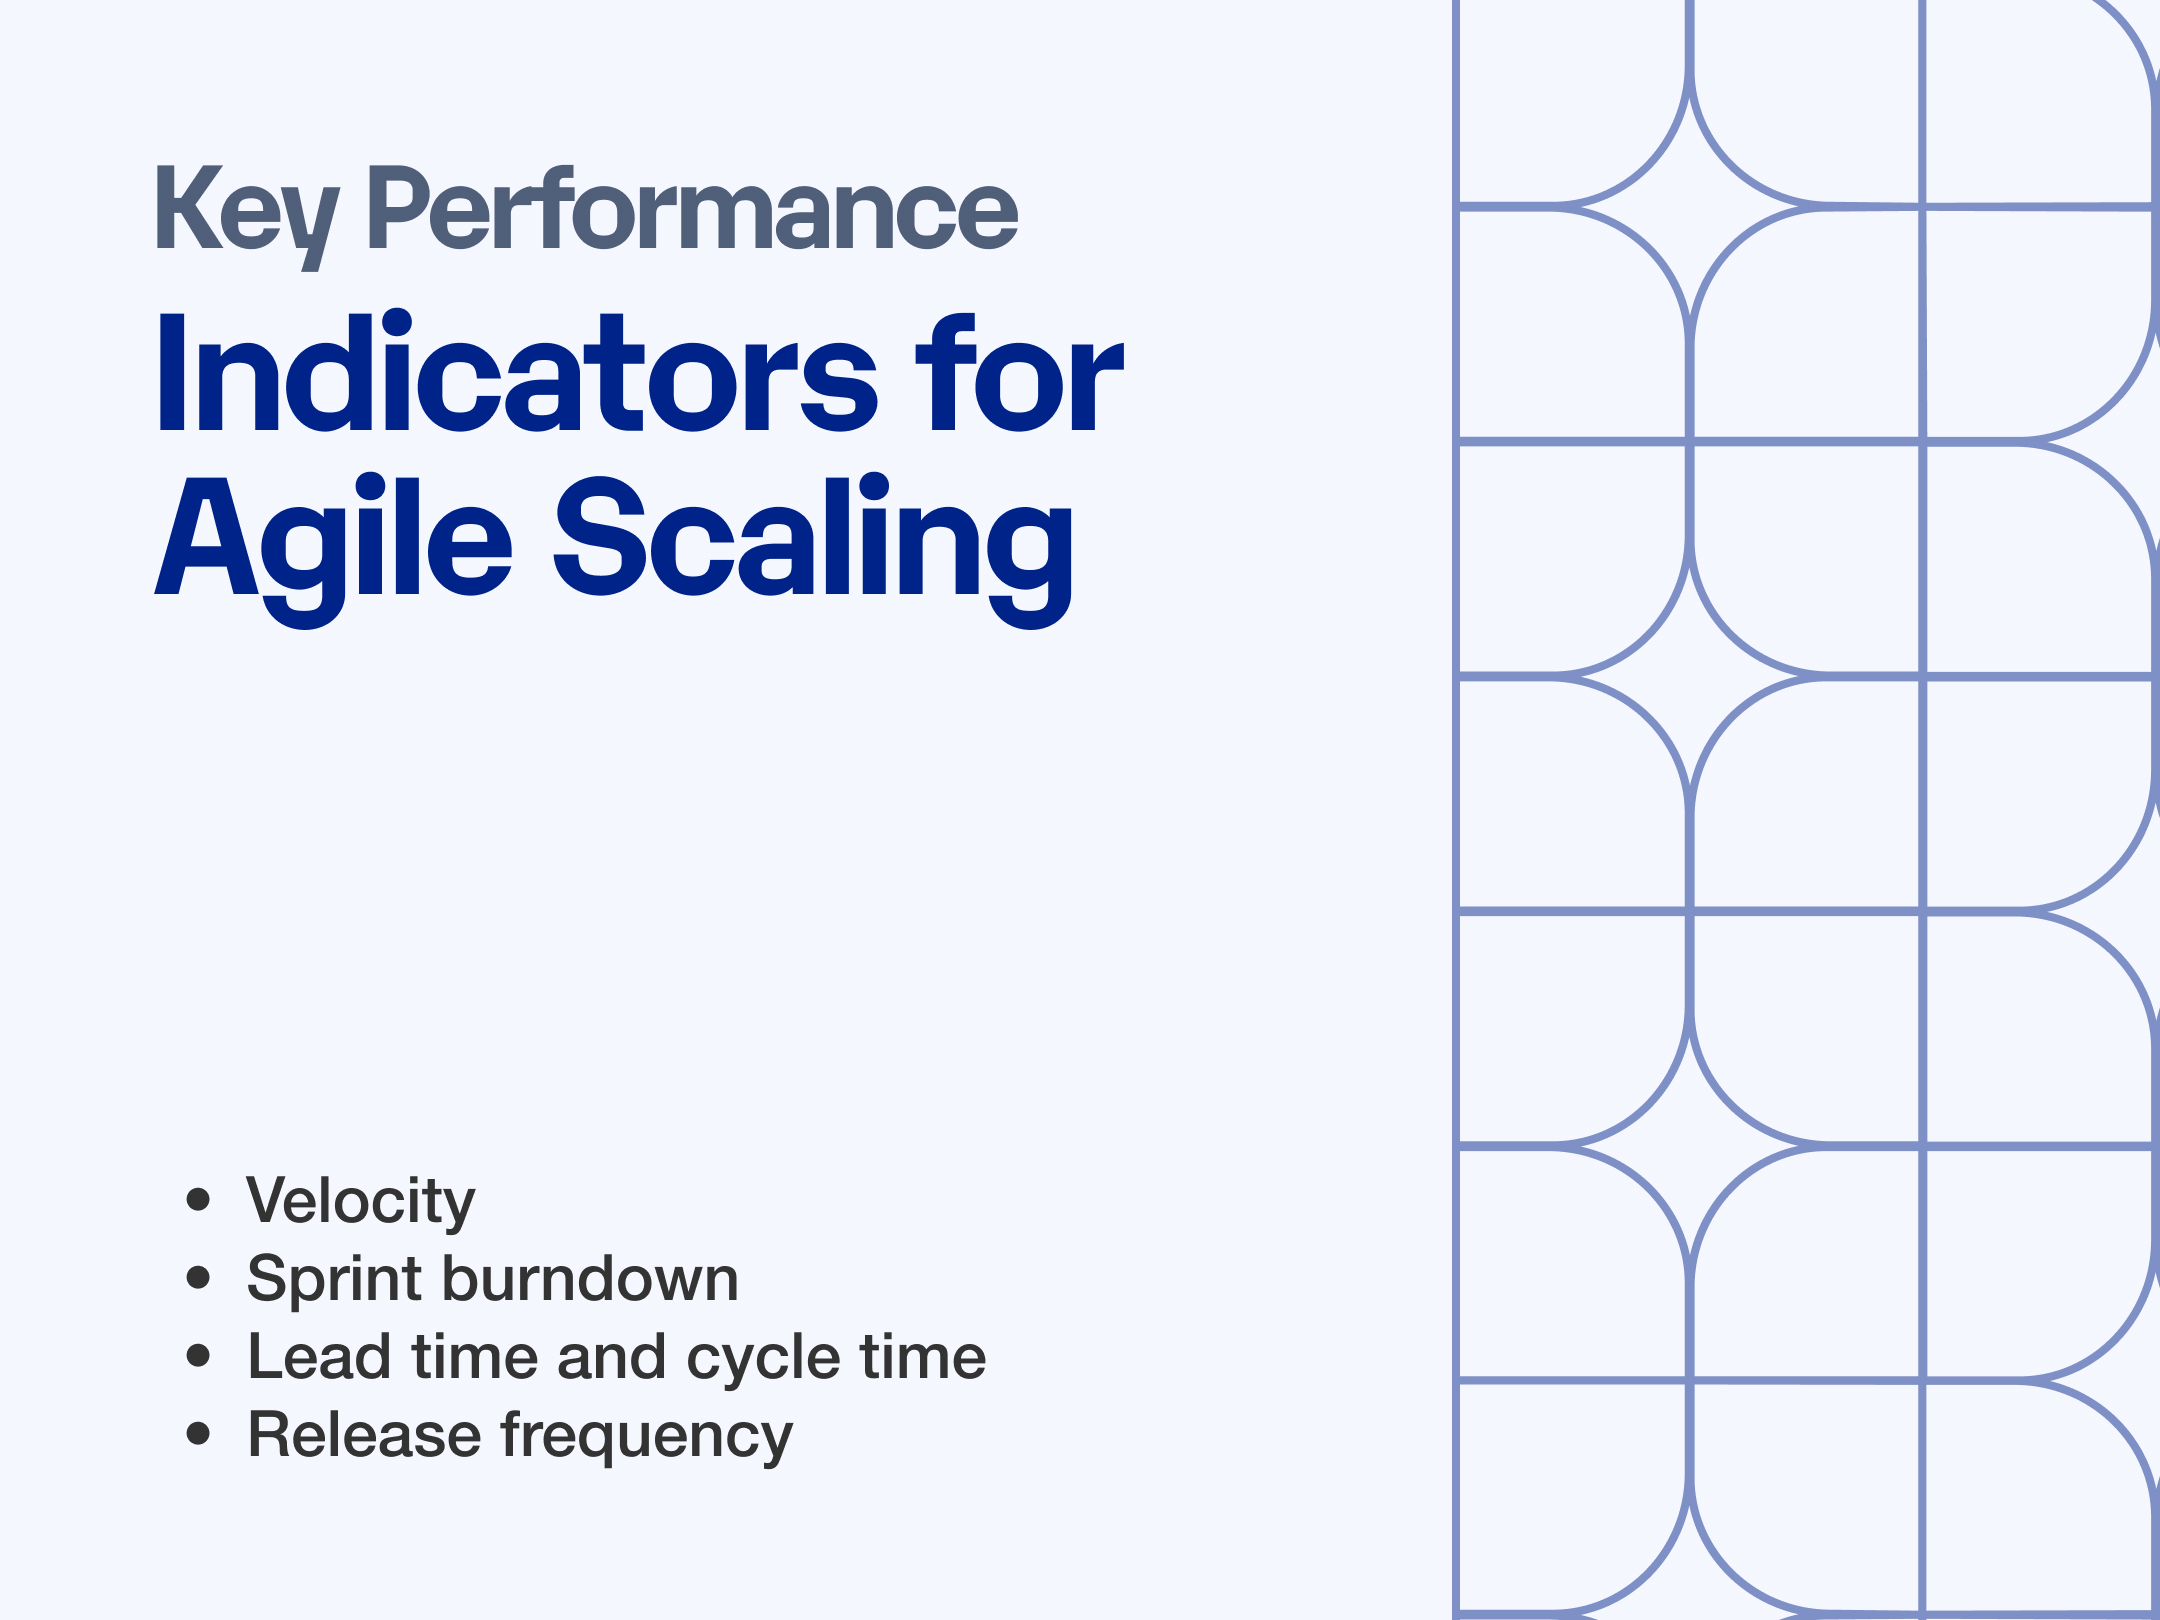 The Key Performance Indicators for Agile Scaling